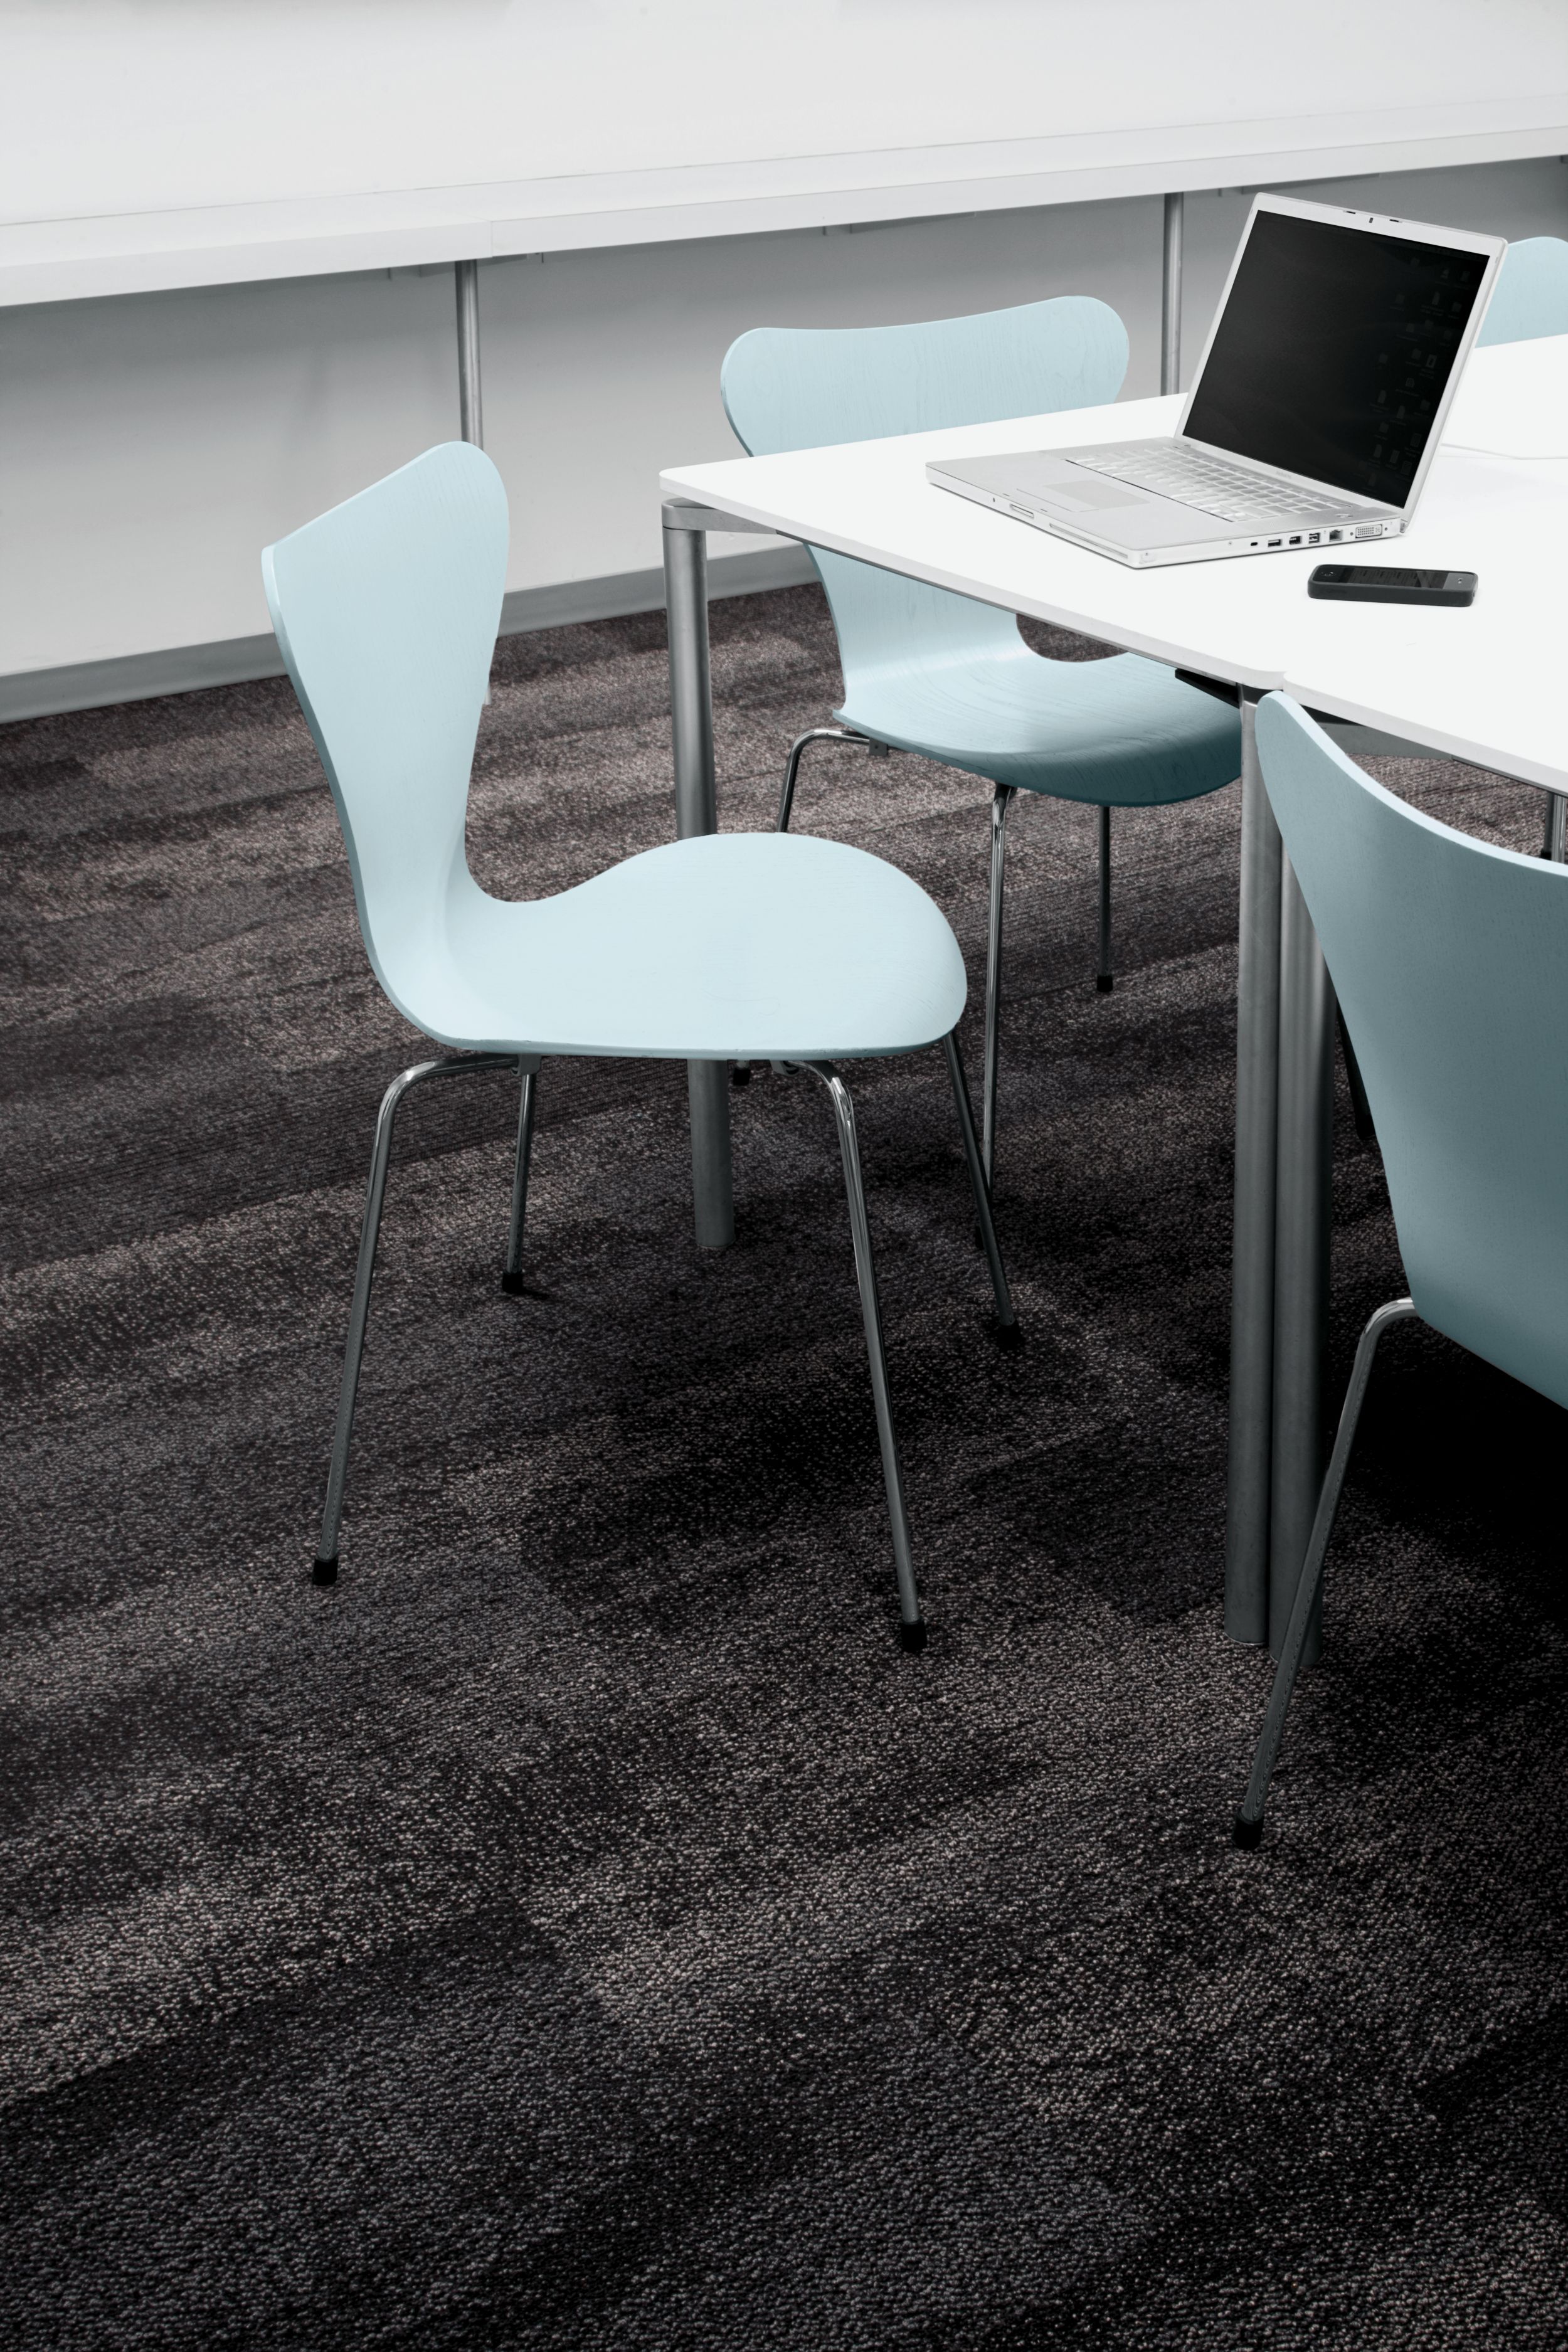 Interface Neighborhood Smooth plank carpet tile in meeting room or classroom with laptop and light blue chairs numéro d’image 1